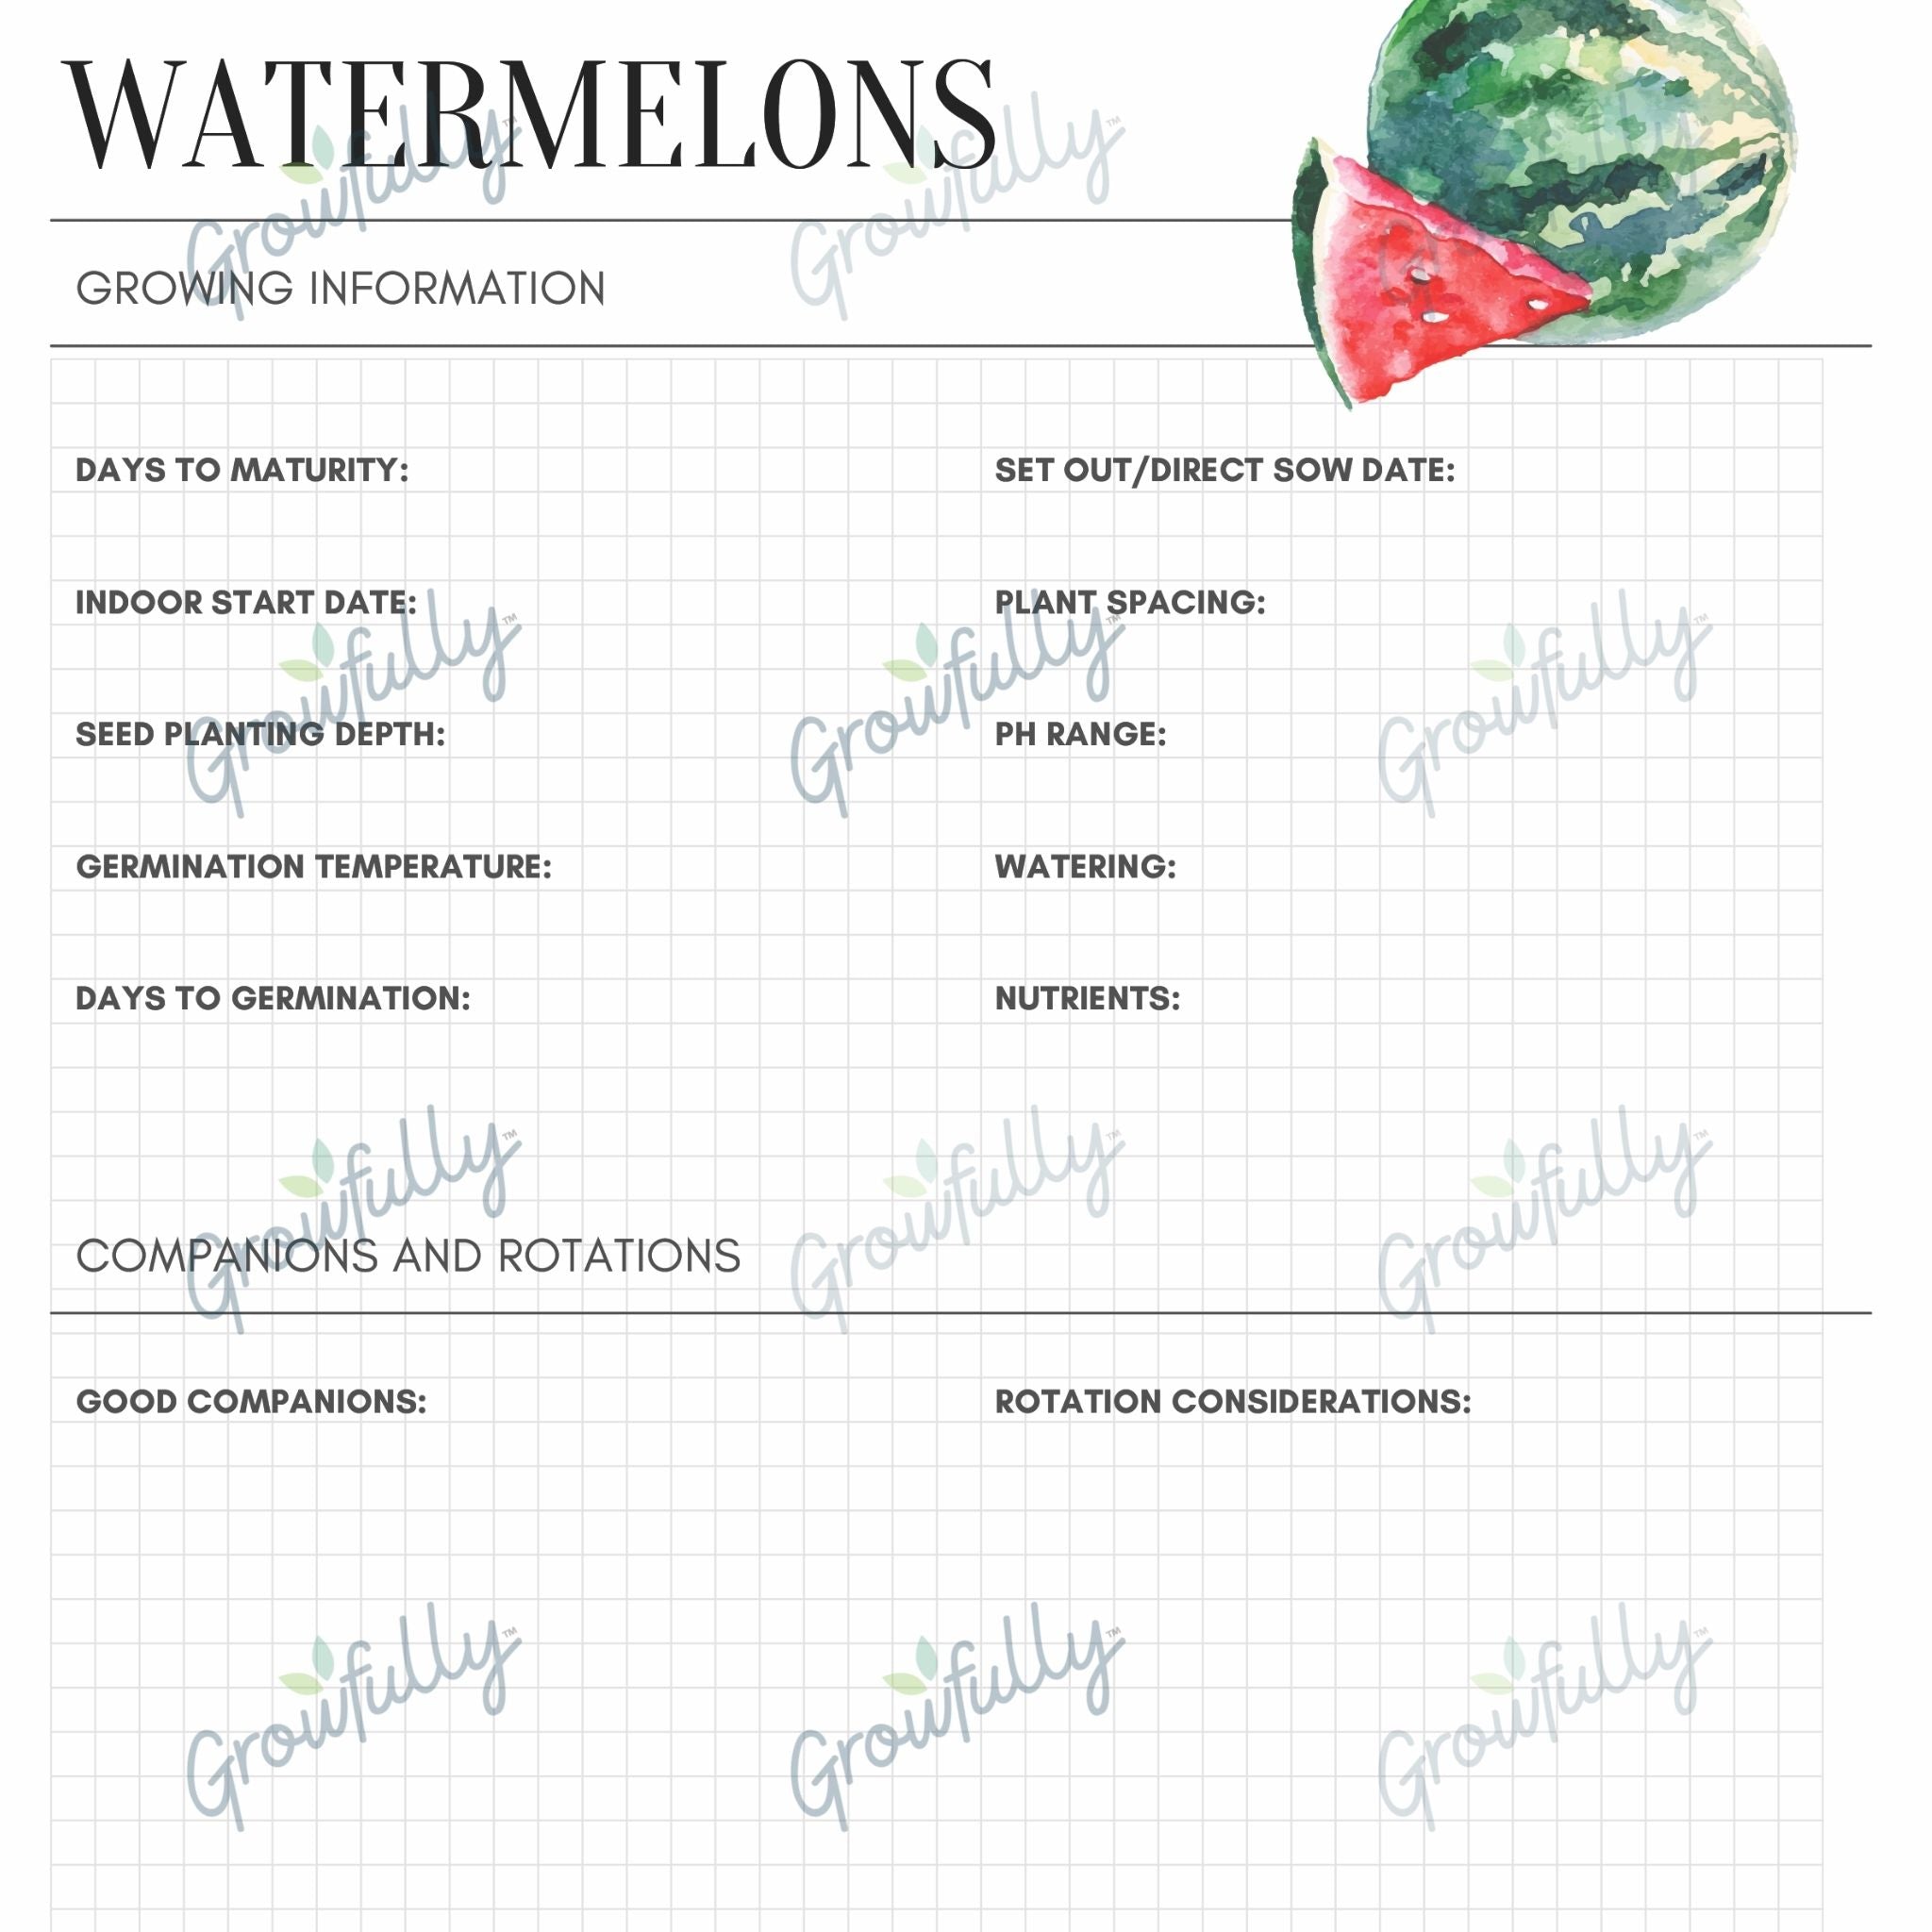 Sample of the growing information printable for Watermelons